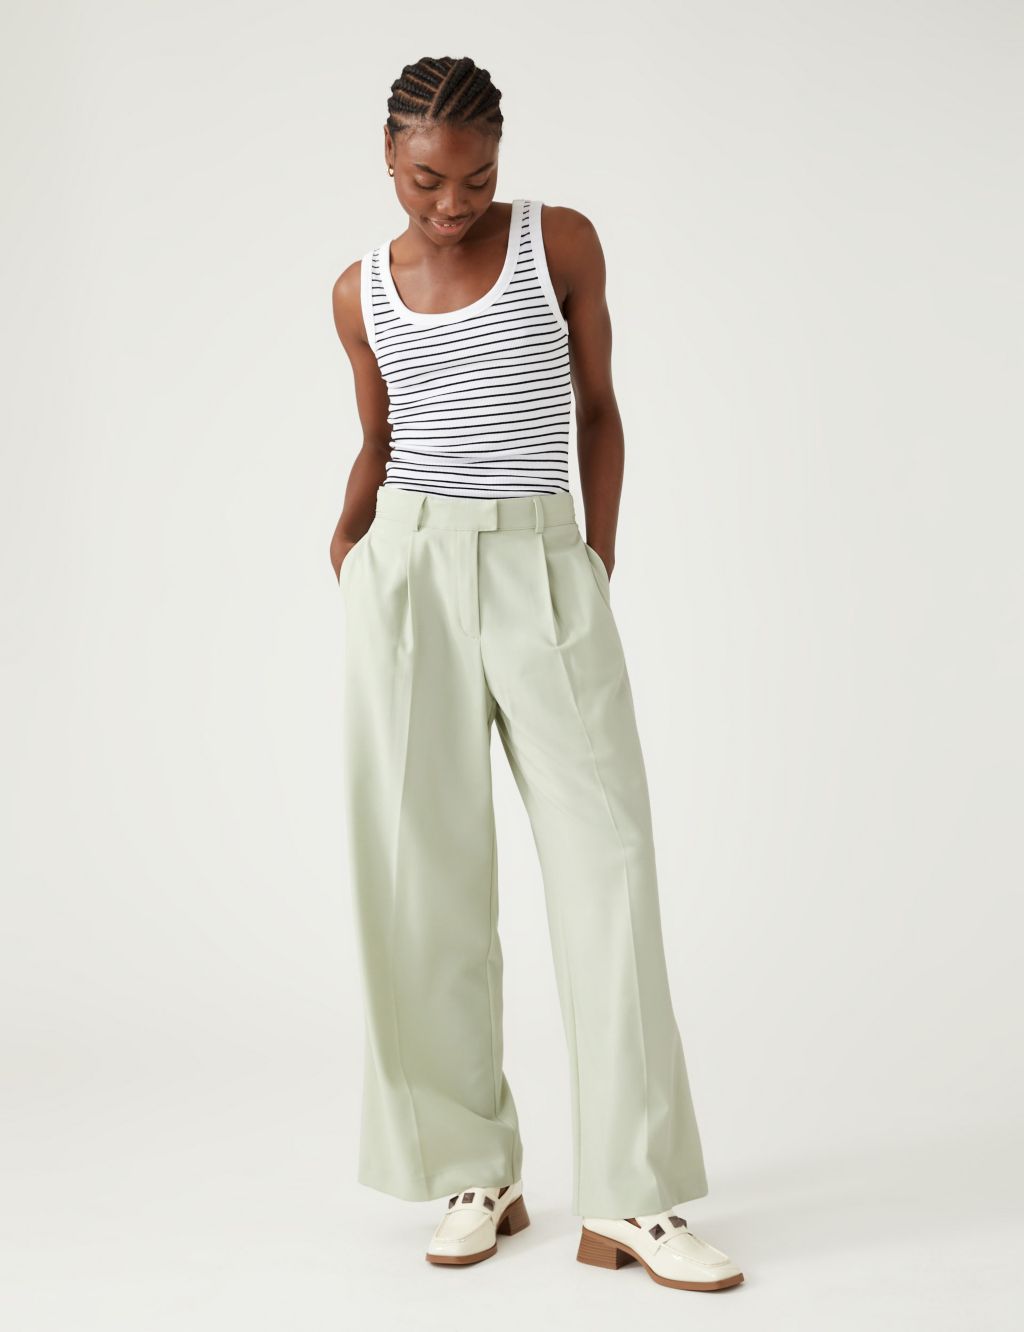 Marl Pleat Front Wide Leg Trousers image 2